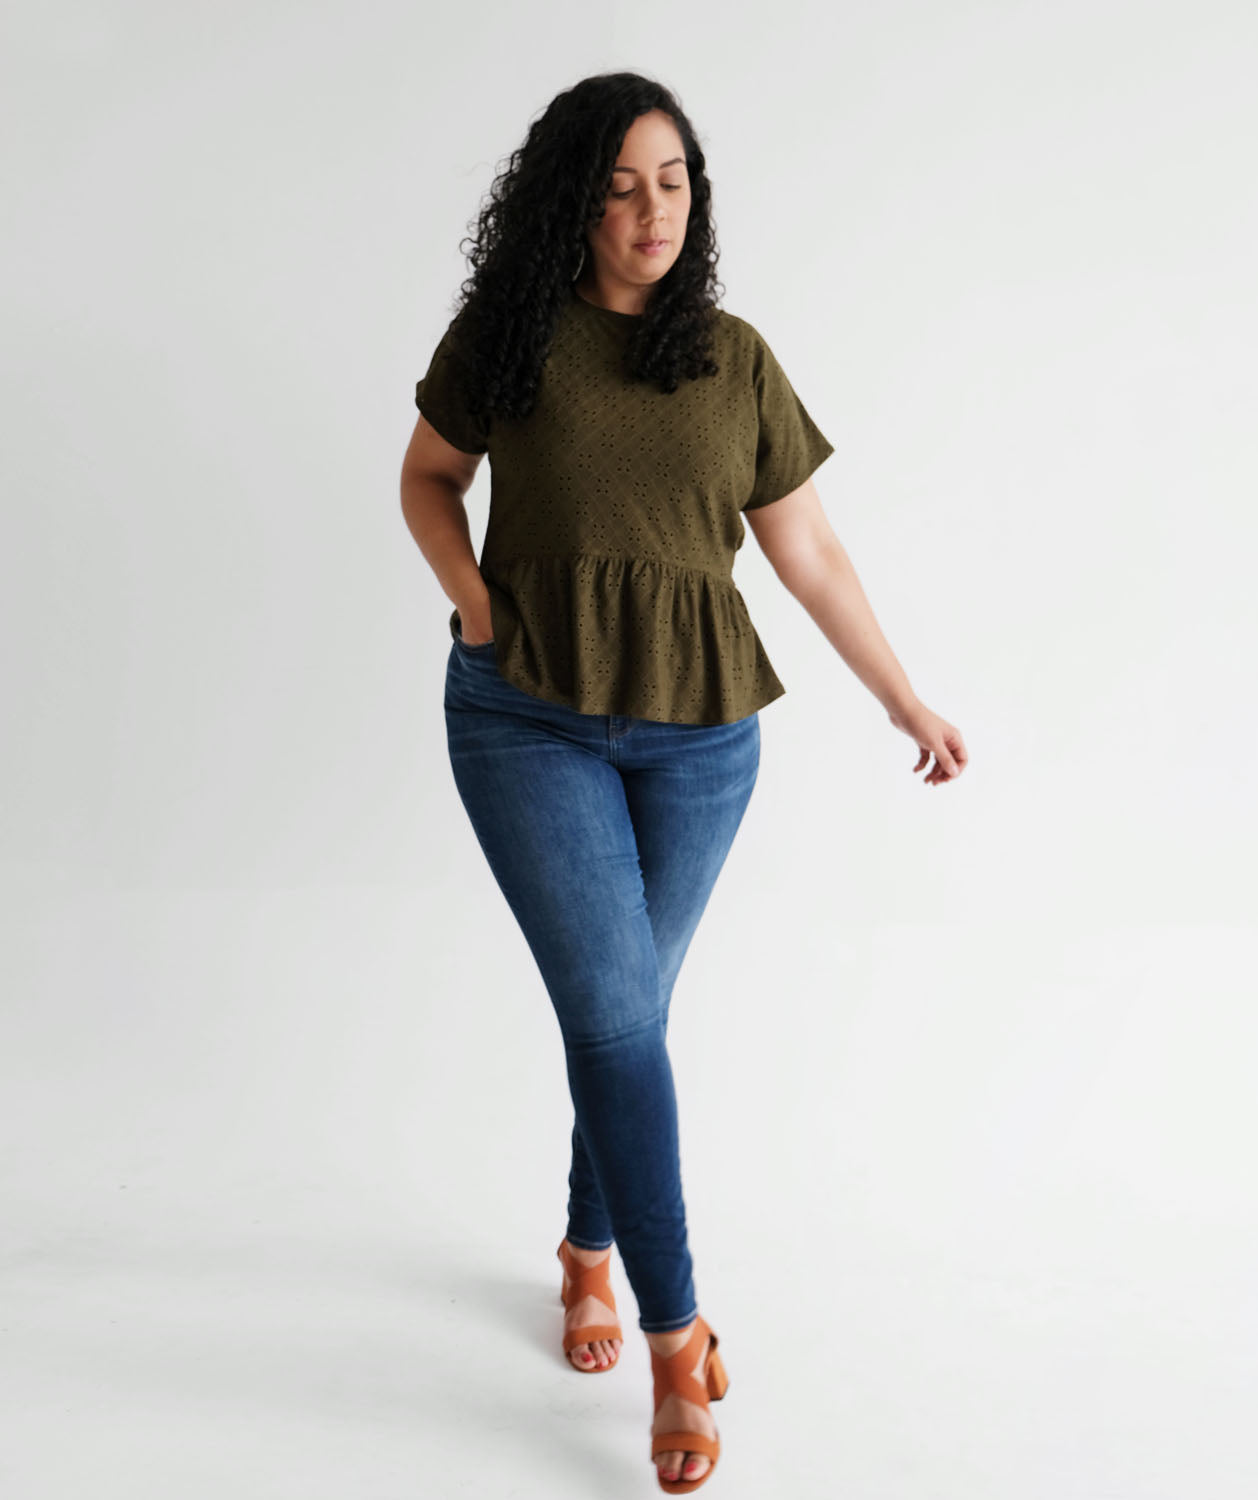 DAHLIA stretch eyelet top in Olive